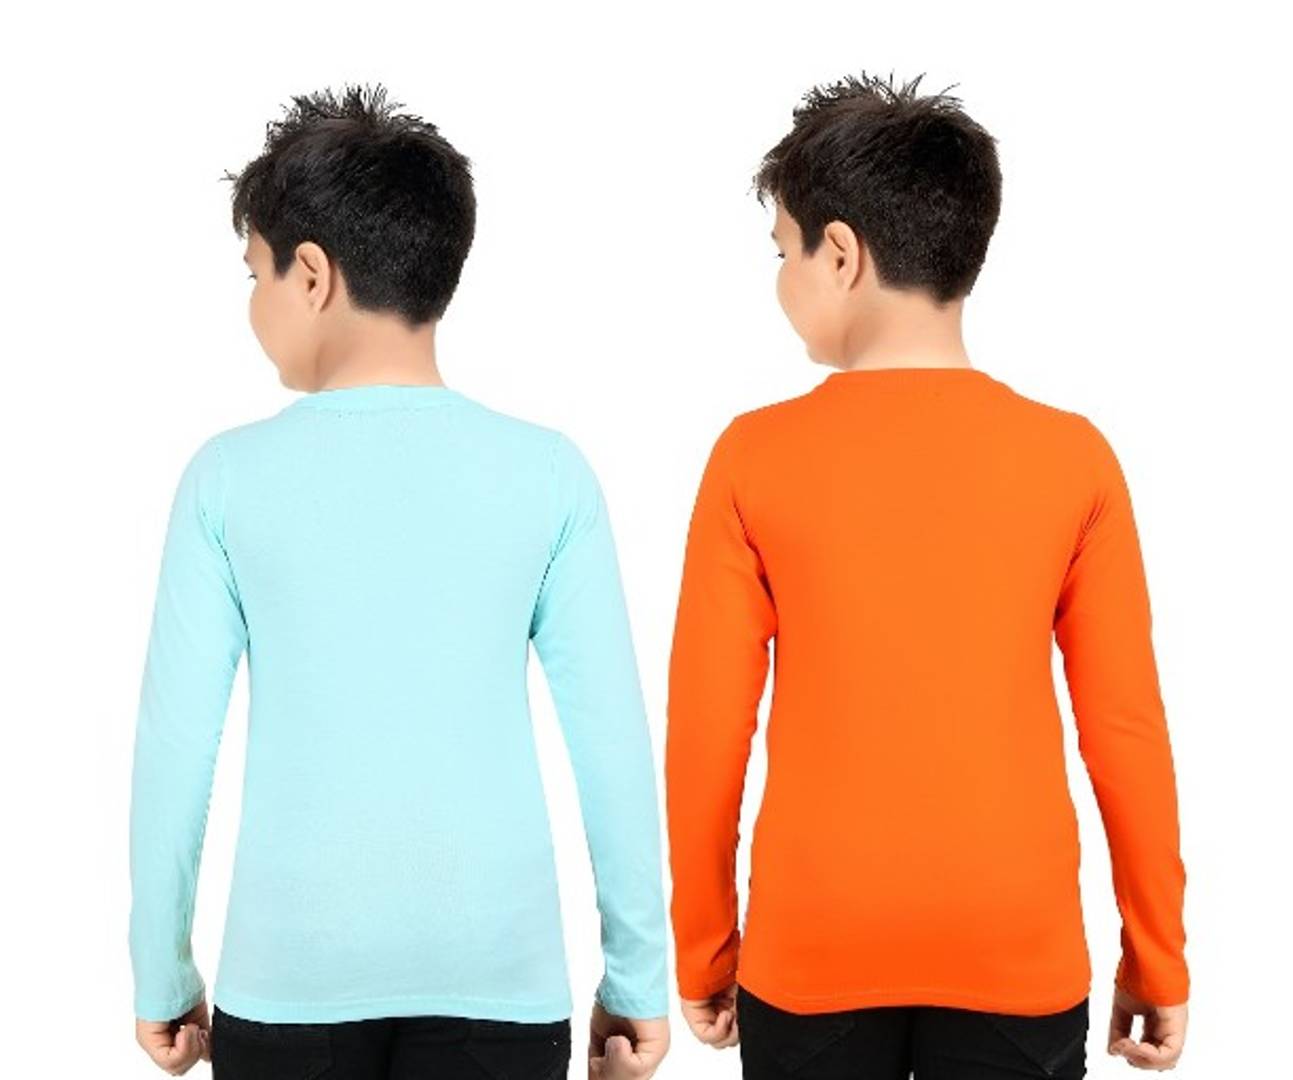 GRANDSTTCH - Boys Tshirts Combo 2 pack